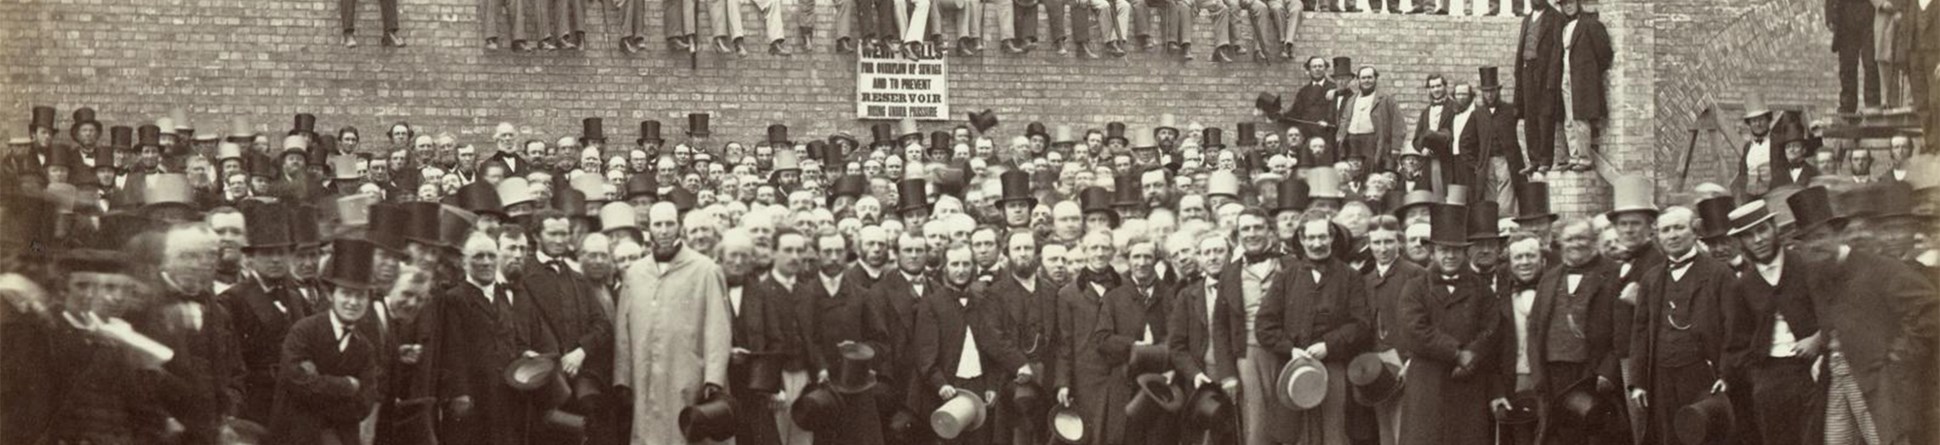 A large group of men posed in front of and on top of the brick wall forming part of the overflow reservoir at Crossness Pumping Station.  Most of the men are smartly dressed complete with top hats. A sign on the wall reads “WEIR WALLS FOR OVERFLOW OF SEWAGE AND TO PREVENT RESERVOIR BEING UNDER PRESSURE”.